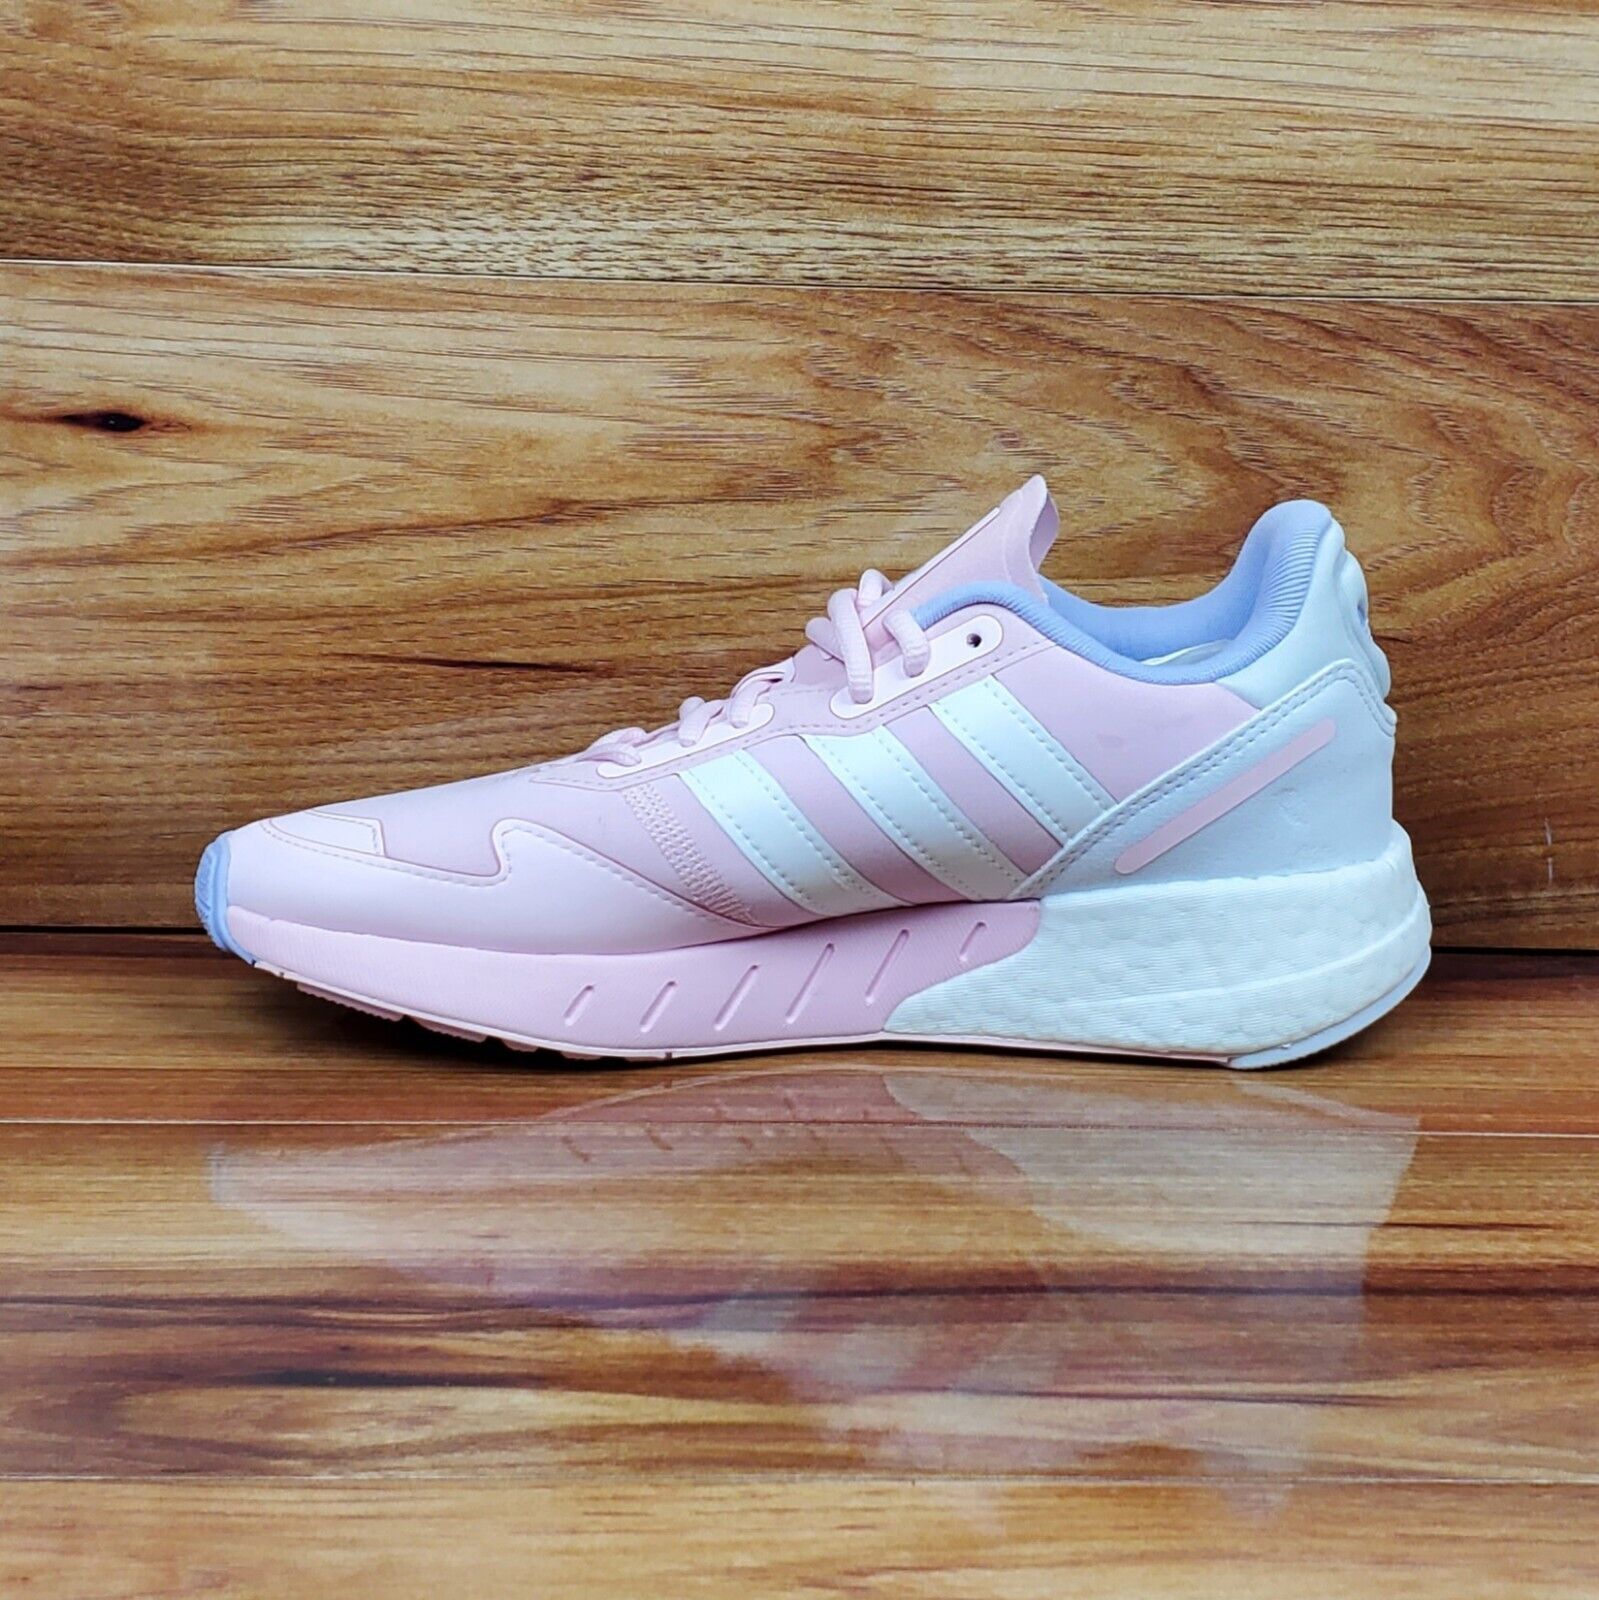 Adidas ZX 1K BOOST Running Shoes Casual 'Clear Pink' Women's Size 